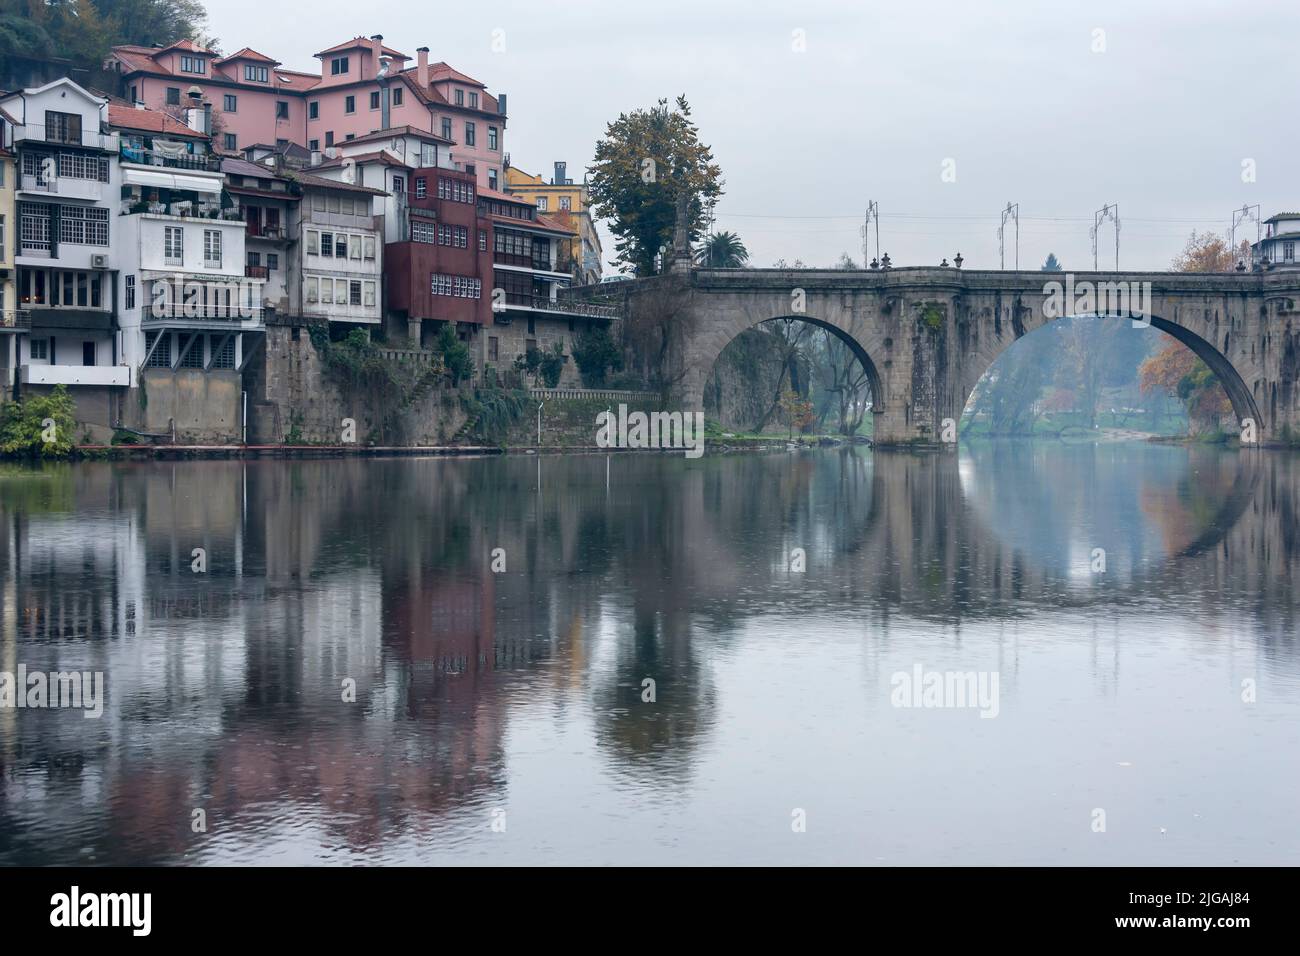 Overhang homes and arch bridge along the Tamega river in Amarante, Portugal. Stock Photo